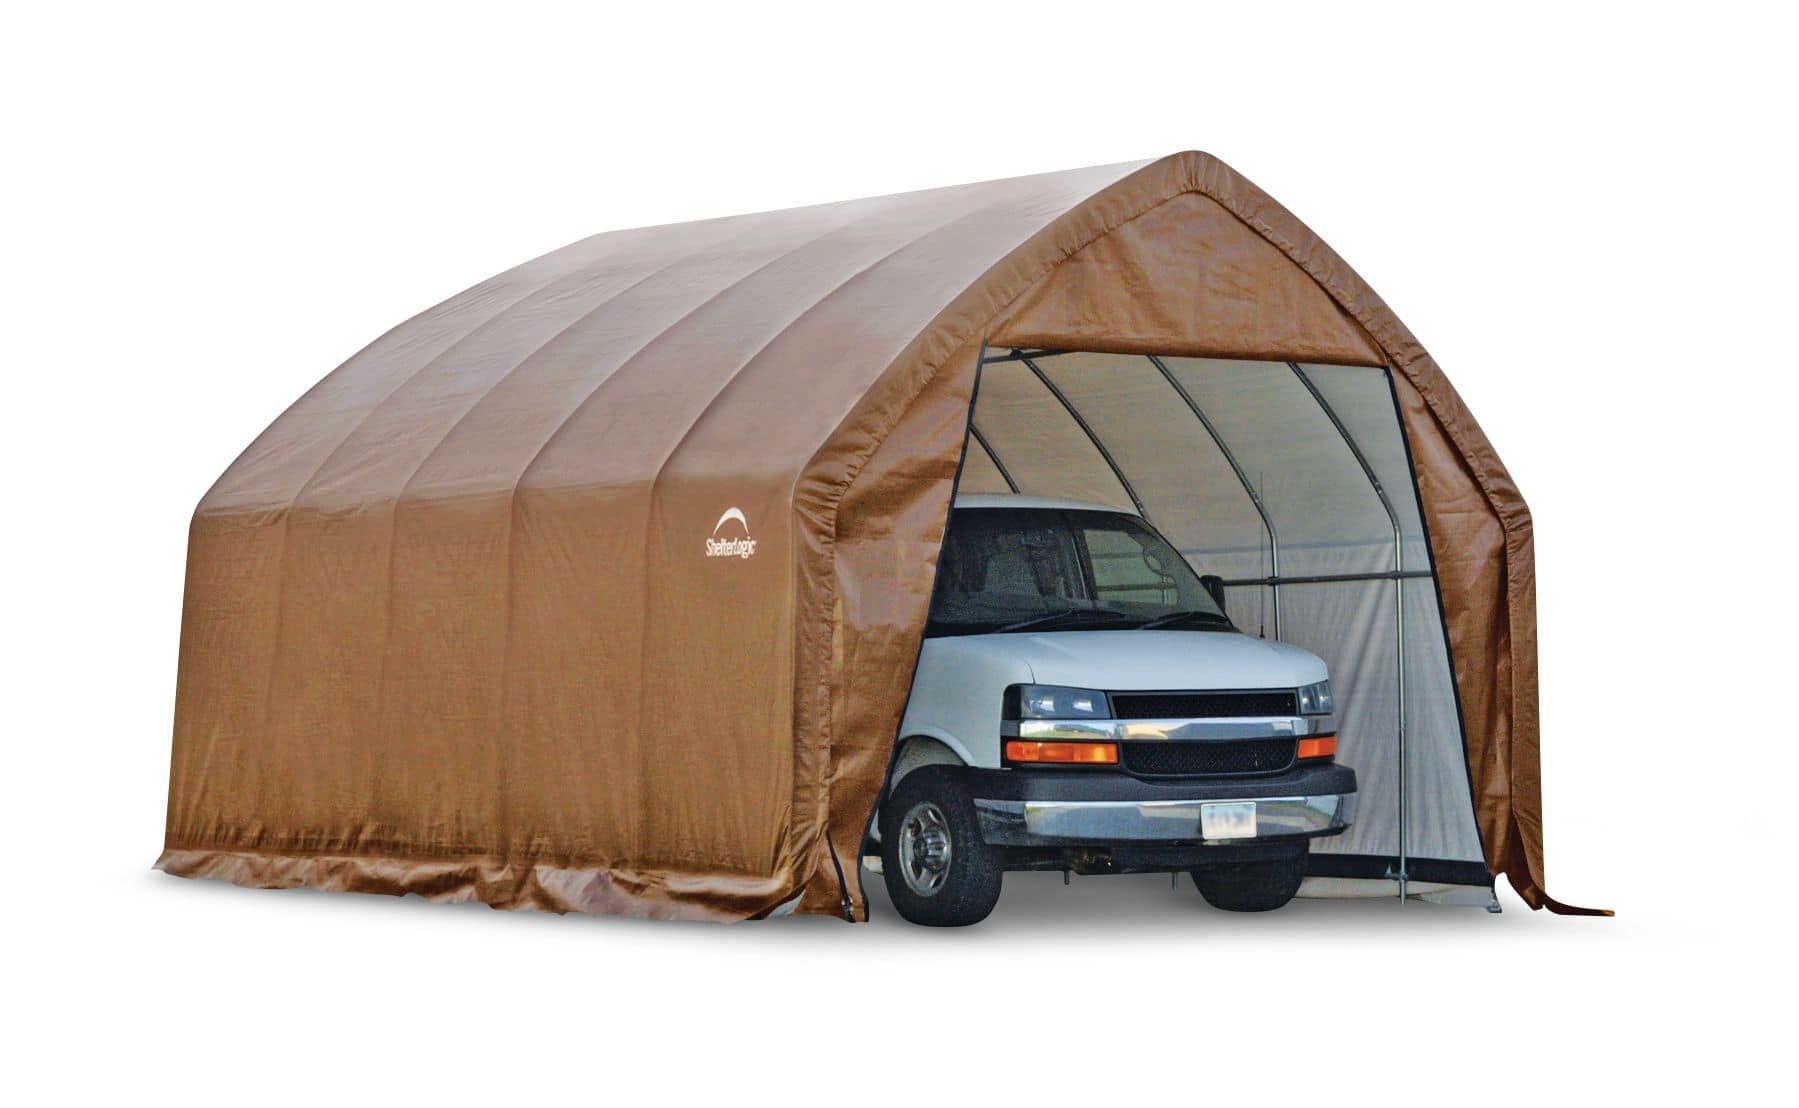  ADVANCE OUTDOOR 10x15 ft Shelter Storage Shed Steel Metal Peak  Roof Anti-Snow Portable Garage Carports for Motorcycle, Boat or Garden  Tools with 2 Roll up Doors & Vents, Beige : Patio